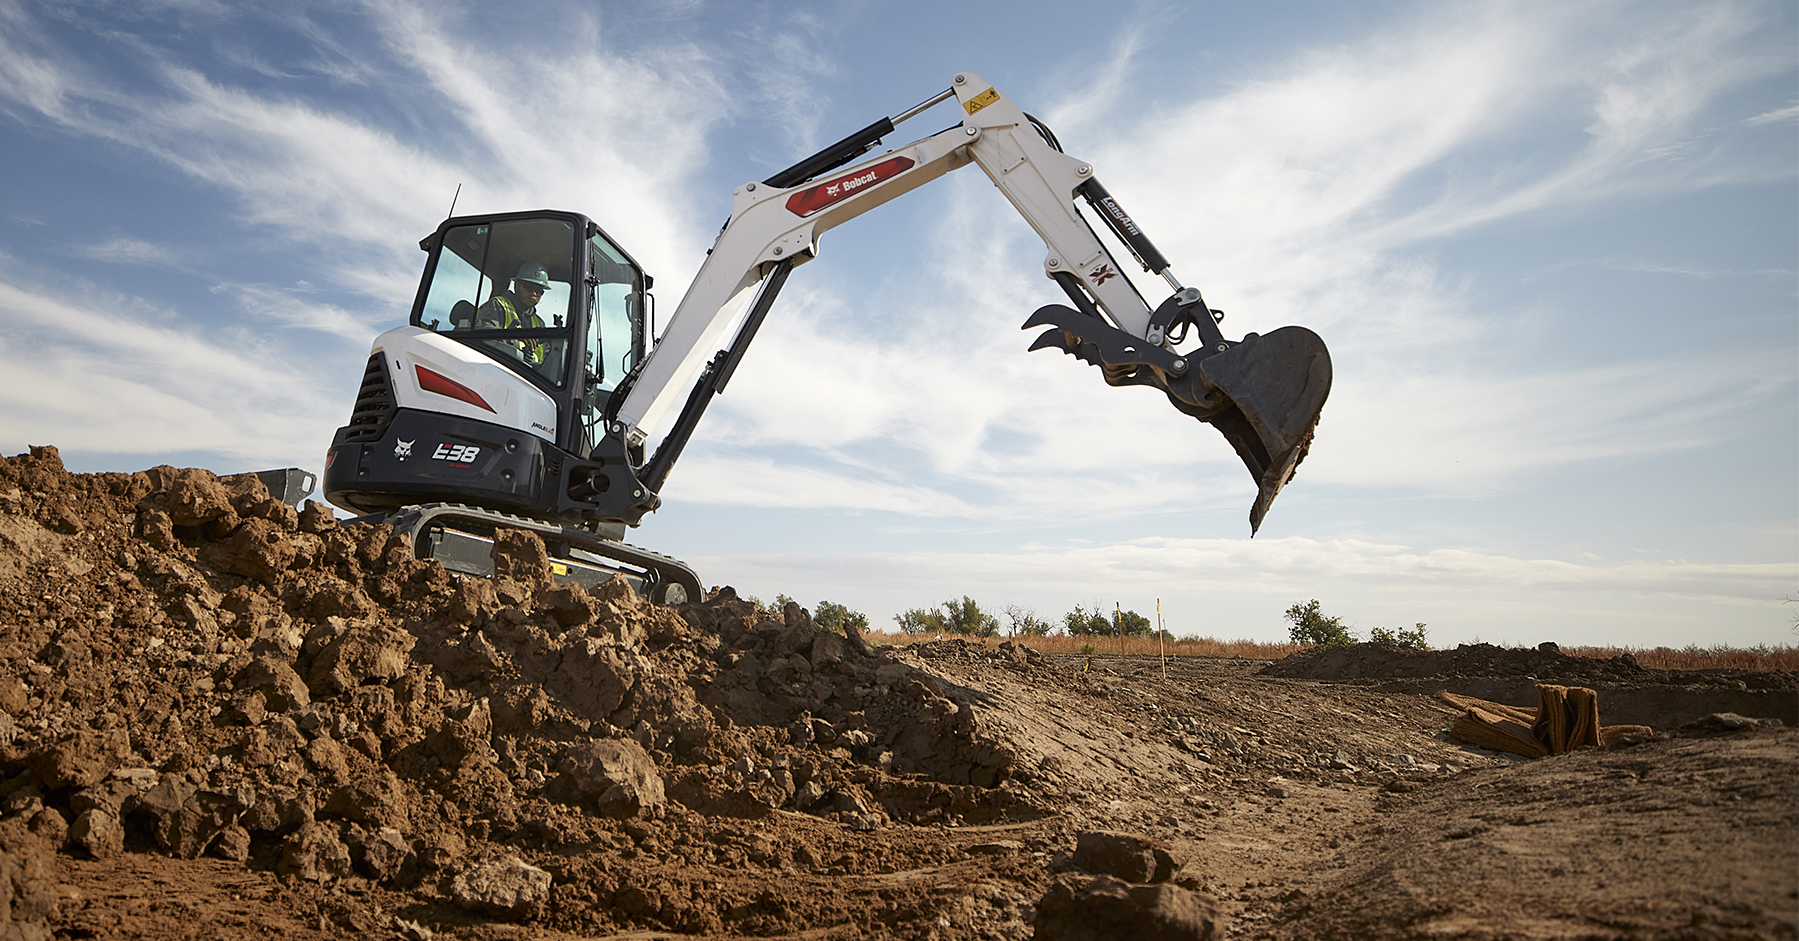 How to Safely Operate Your Construction Equipment on a Slope